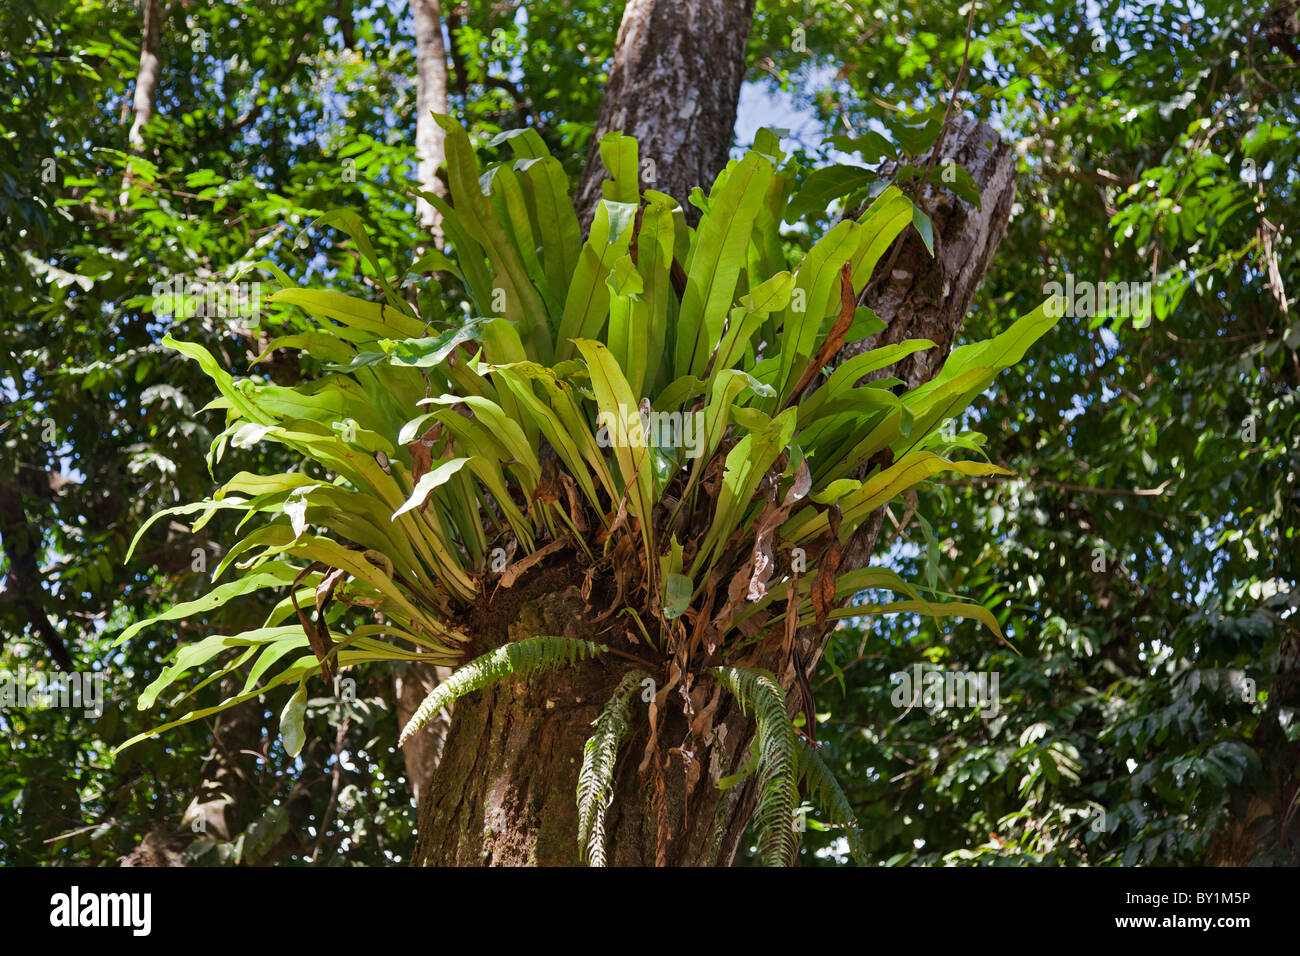 A Bird  s Nest Fern (Asplenium sp.) in the Amani Nature Reserve, a protected area of 8,380ha situated in the Eastern Arc of the Stock Photo